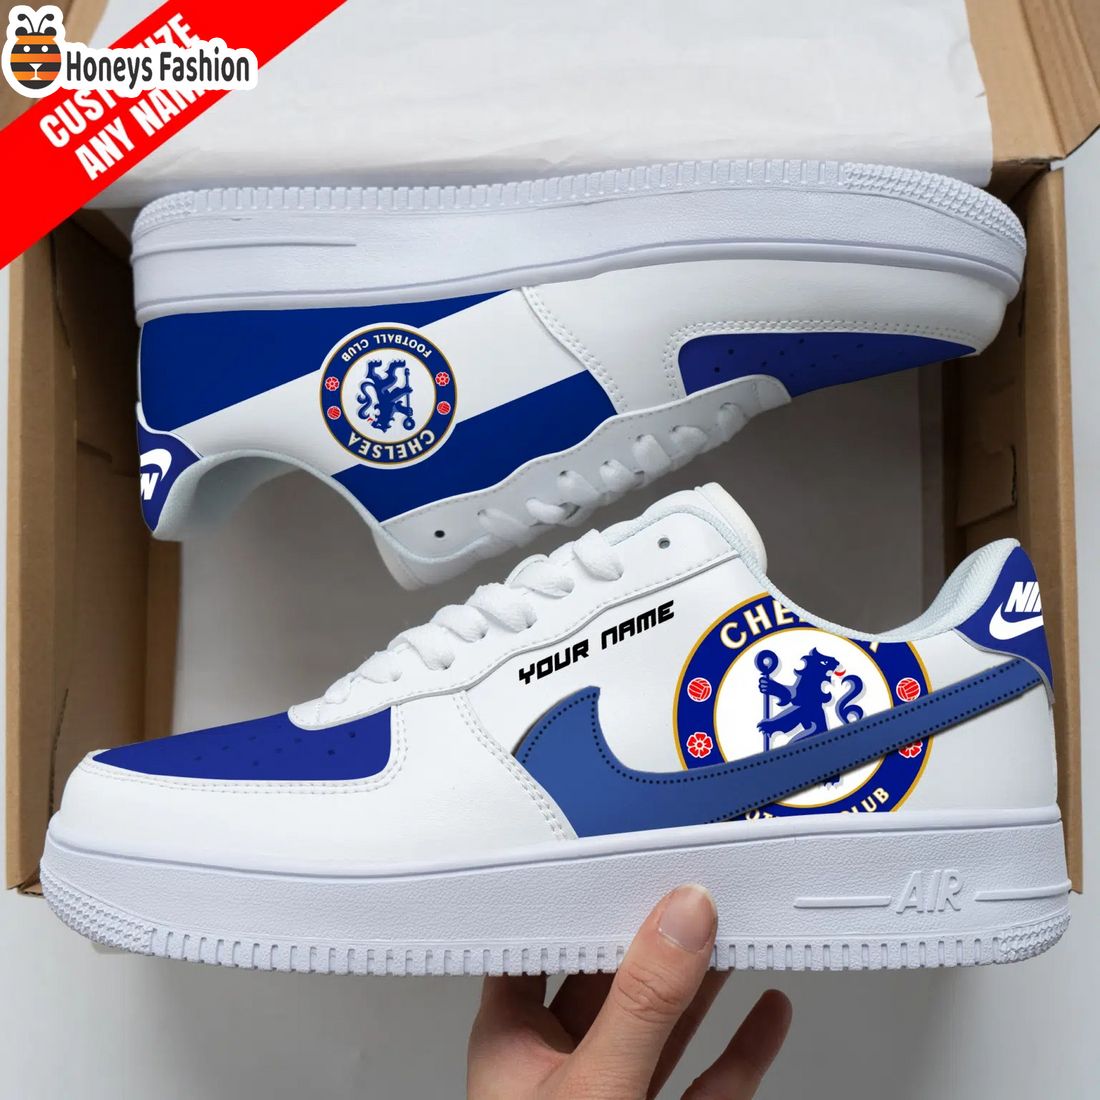 Chelsea Personalized Nike Air Force Sneakers